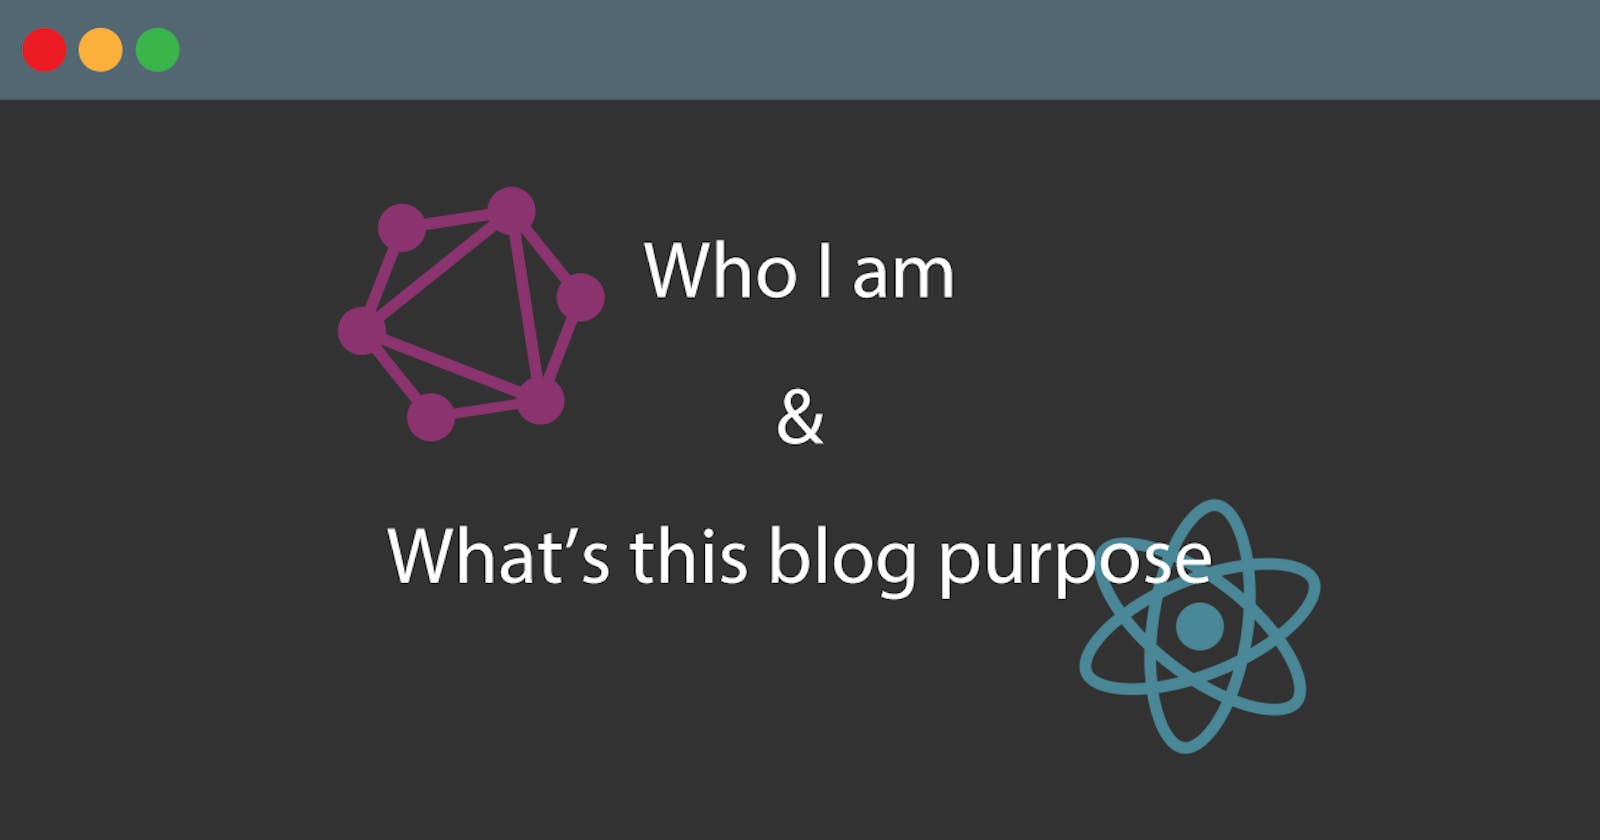 Who I am & what's this blog purpose